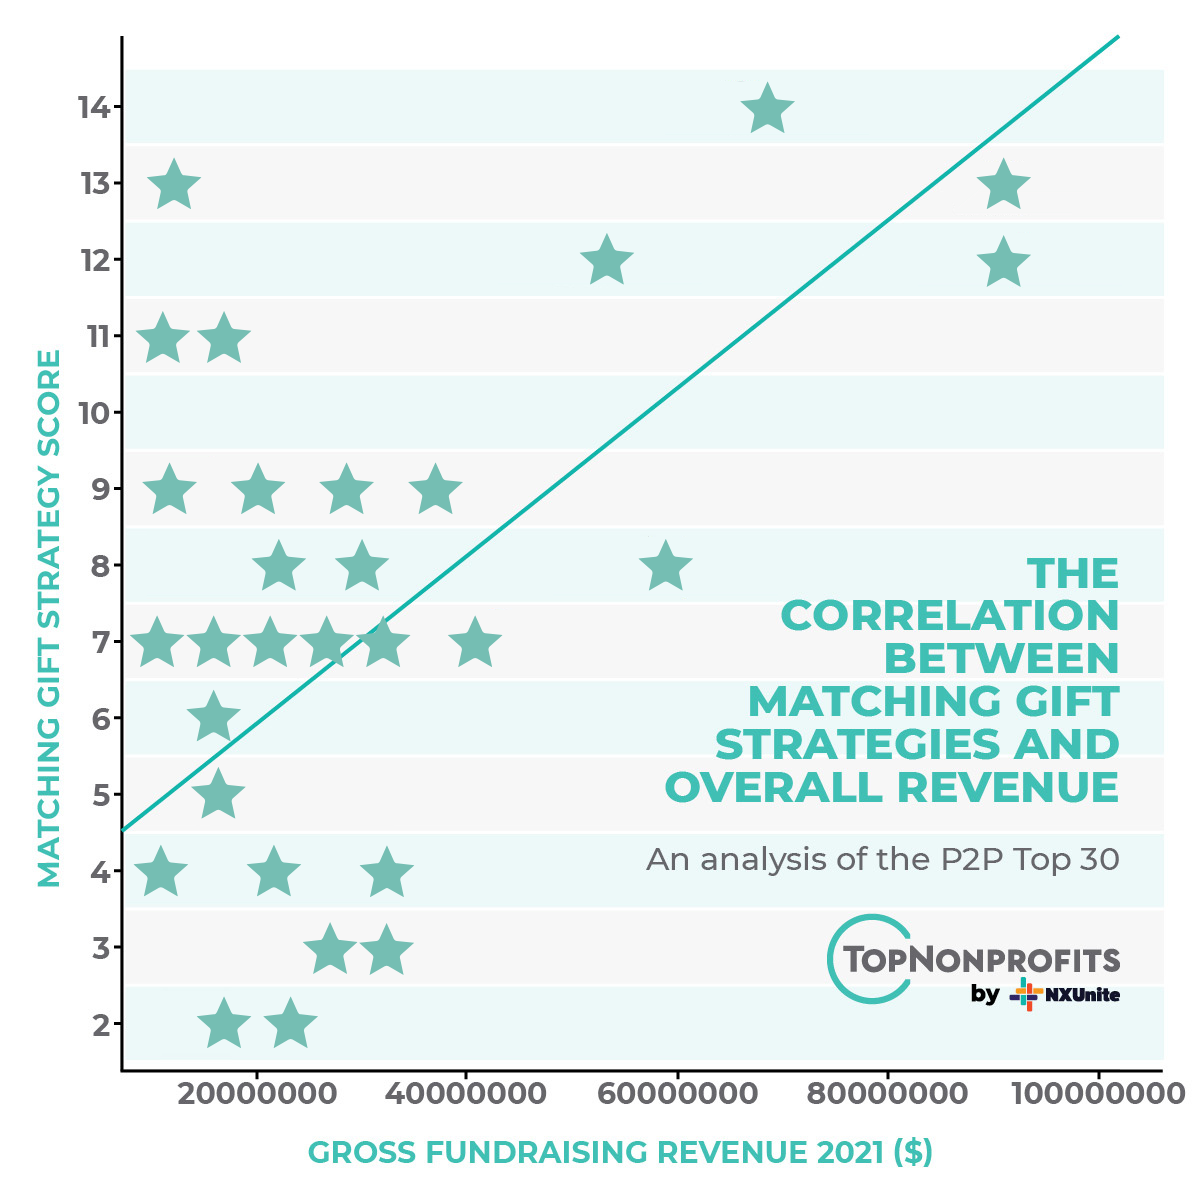 Check out the positive correlation between matching gift strategies and overall revenue.